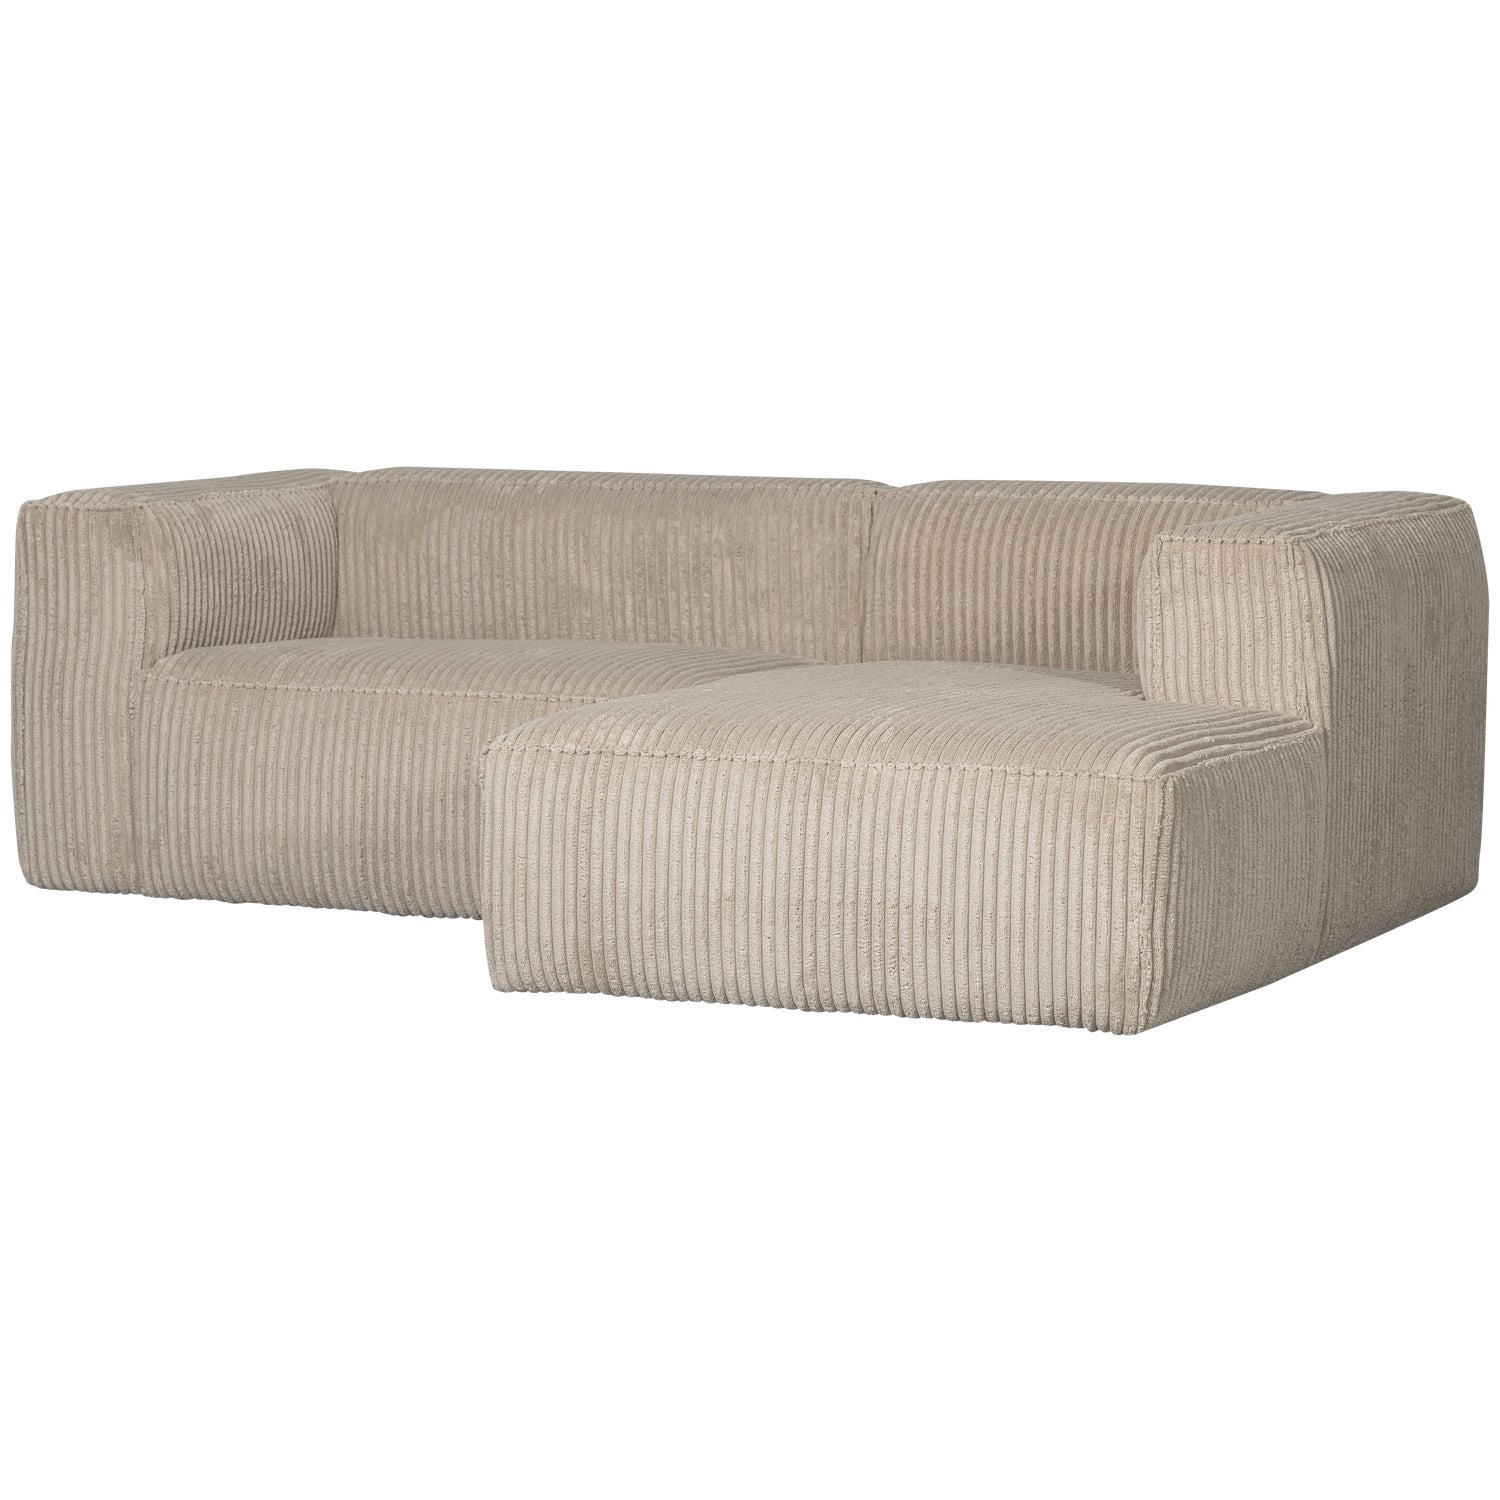 377433-RR-02_VS_WE_Bean_chaise_longue_links_grove_ribstof_travertin_SA.png?auto=webp&format=png&width=1500&height=1500